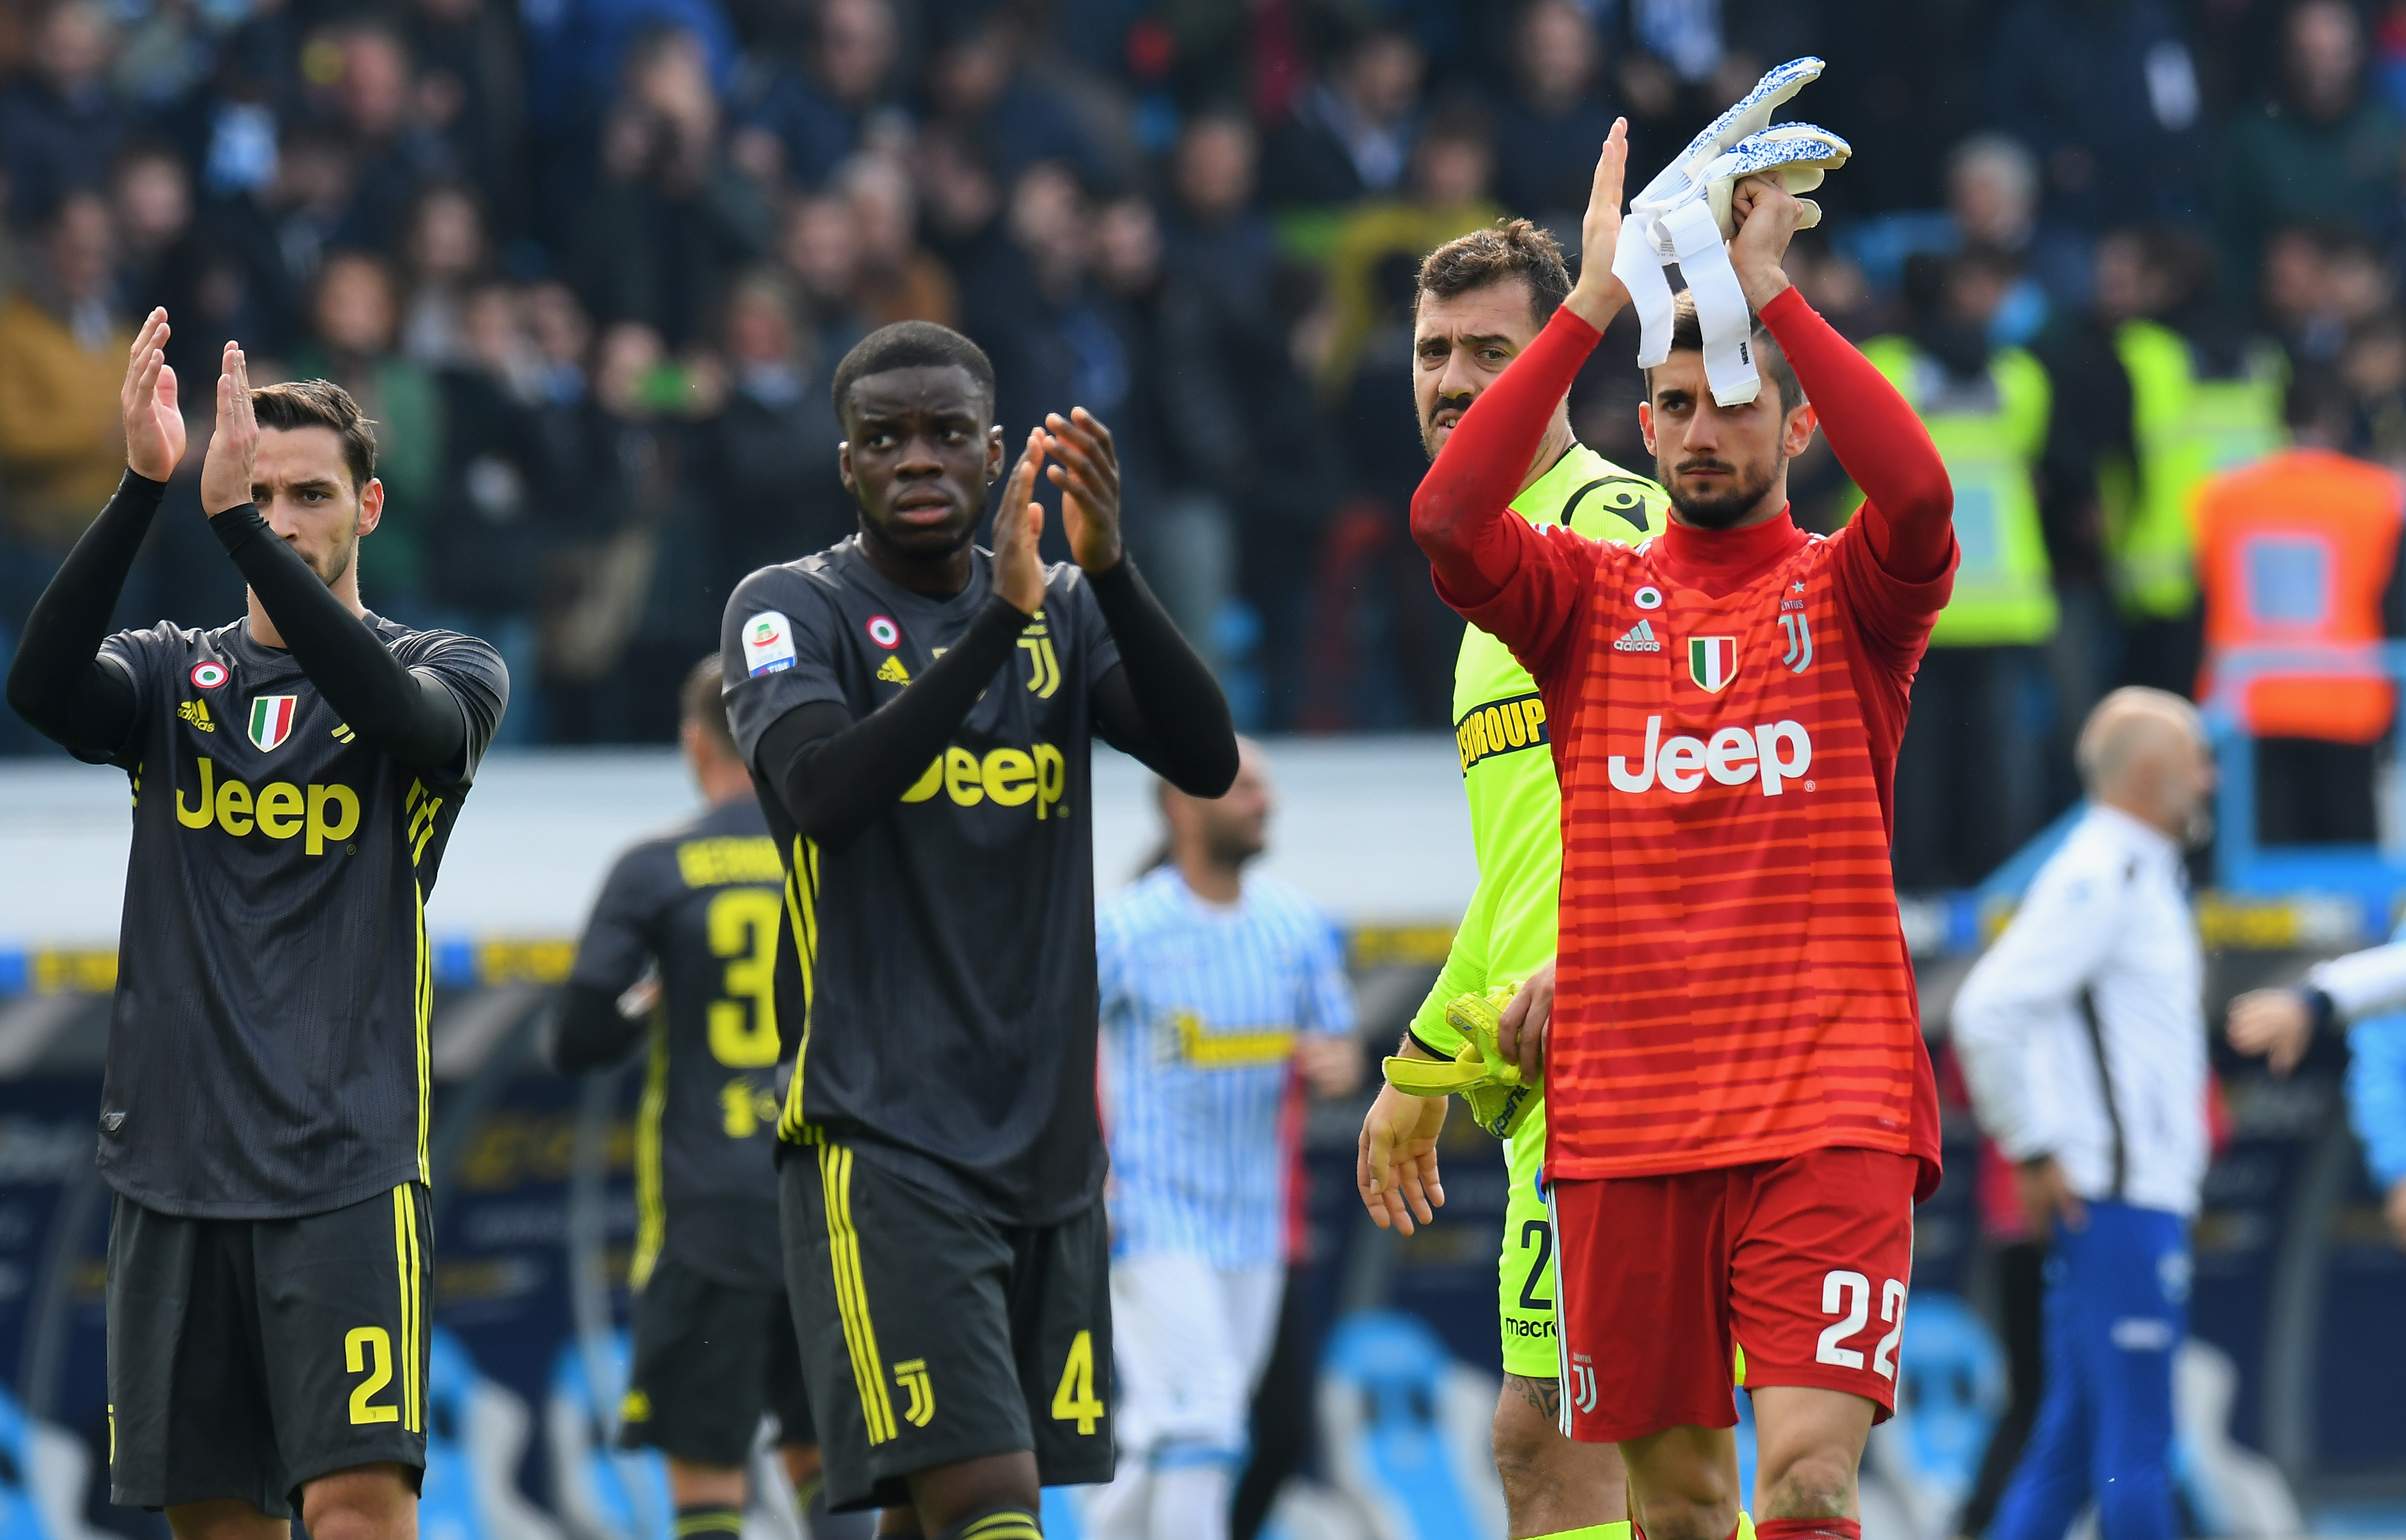 FERRARA, ITALY - APRIL 13: Juventus players Mattia De Sciglio, Stephy Mavididi and Mattia Perin during the Serie A match between SPAL and Juventus at Stadio Paolo Mazza on April 13, 2019 in Ferrara, Italy. (Photo by Juventus FC/Juventus FC via Getty Images)